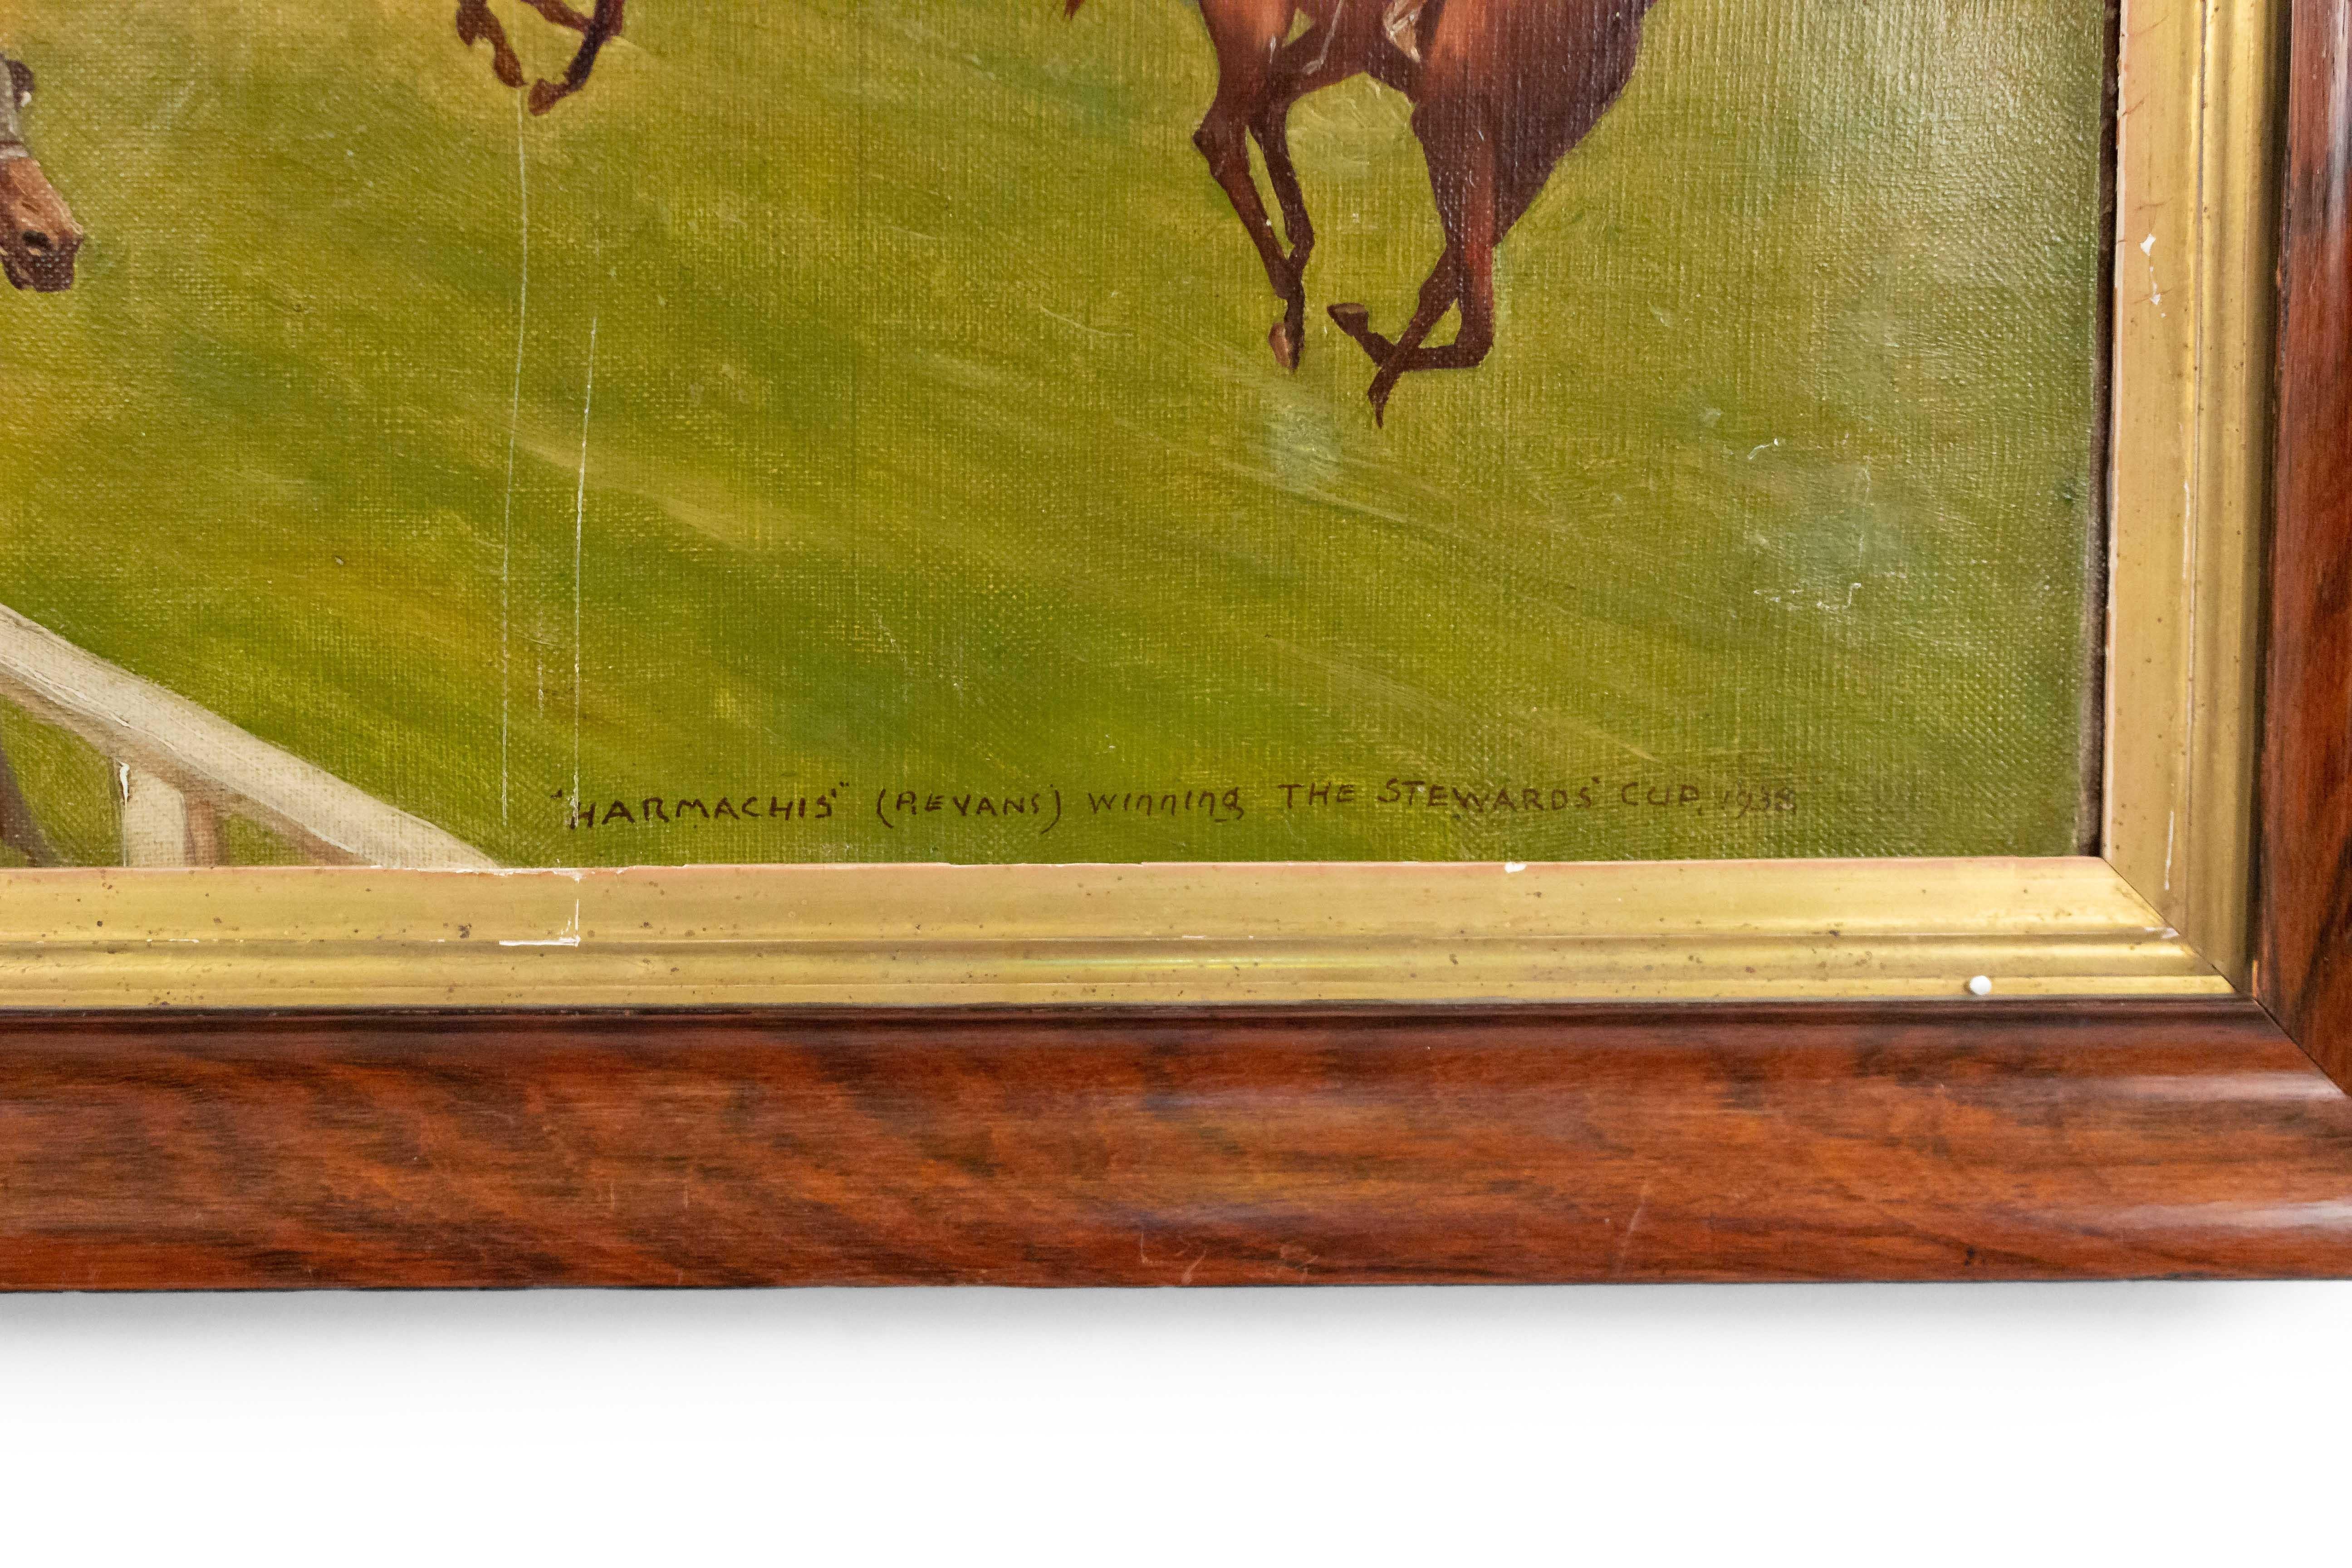 English Art Moderne (Mid 20th Cent) oil painting of Stewart's Cup horse race in wood frame.
 